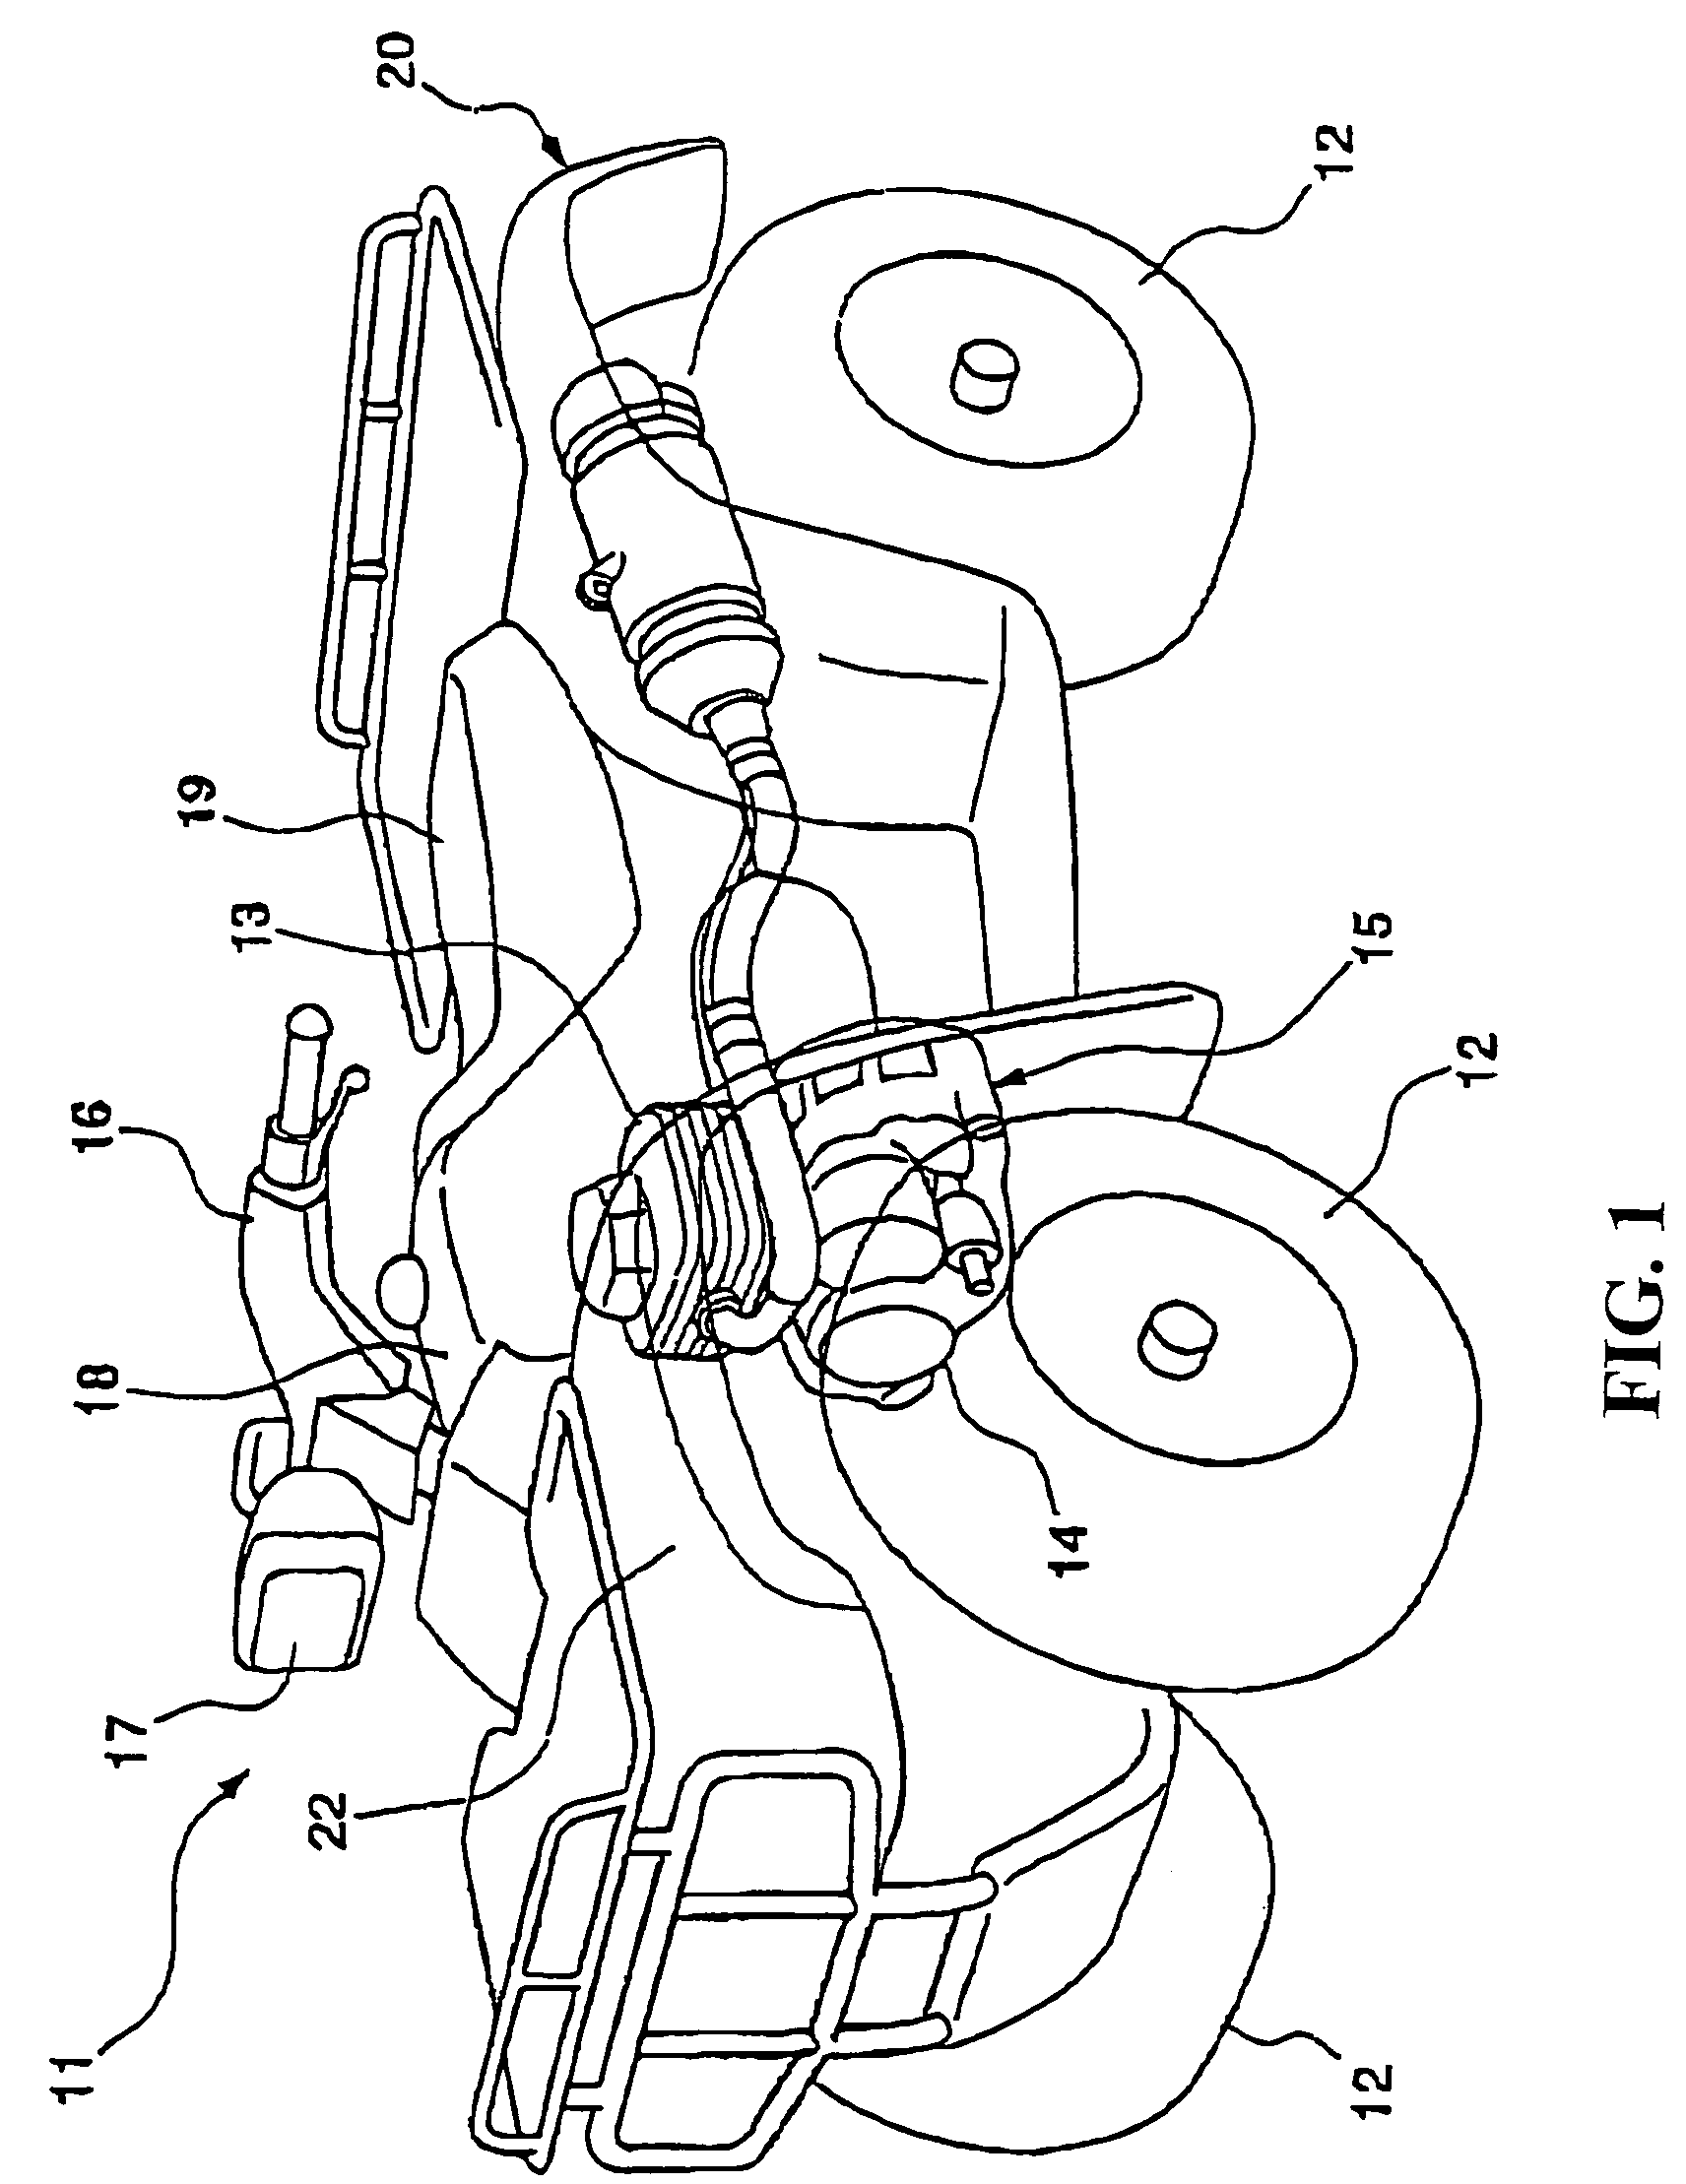 Frame structure in saddle type vehicle and method of manufacturing frame